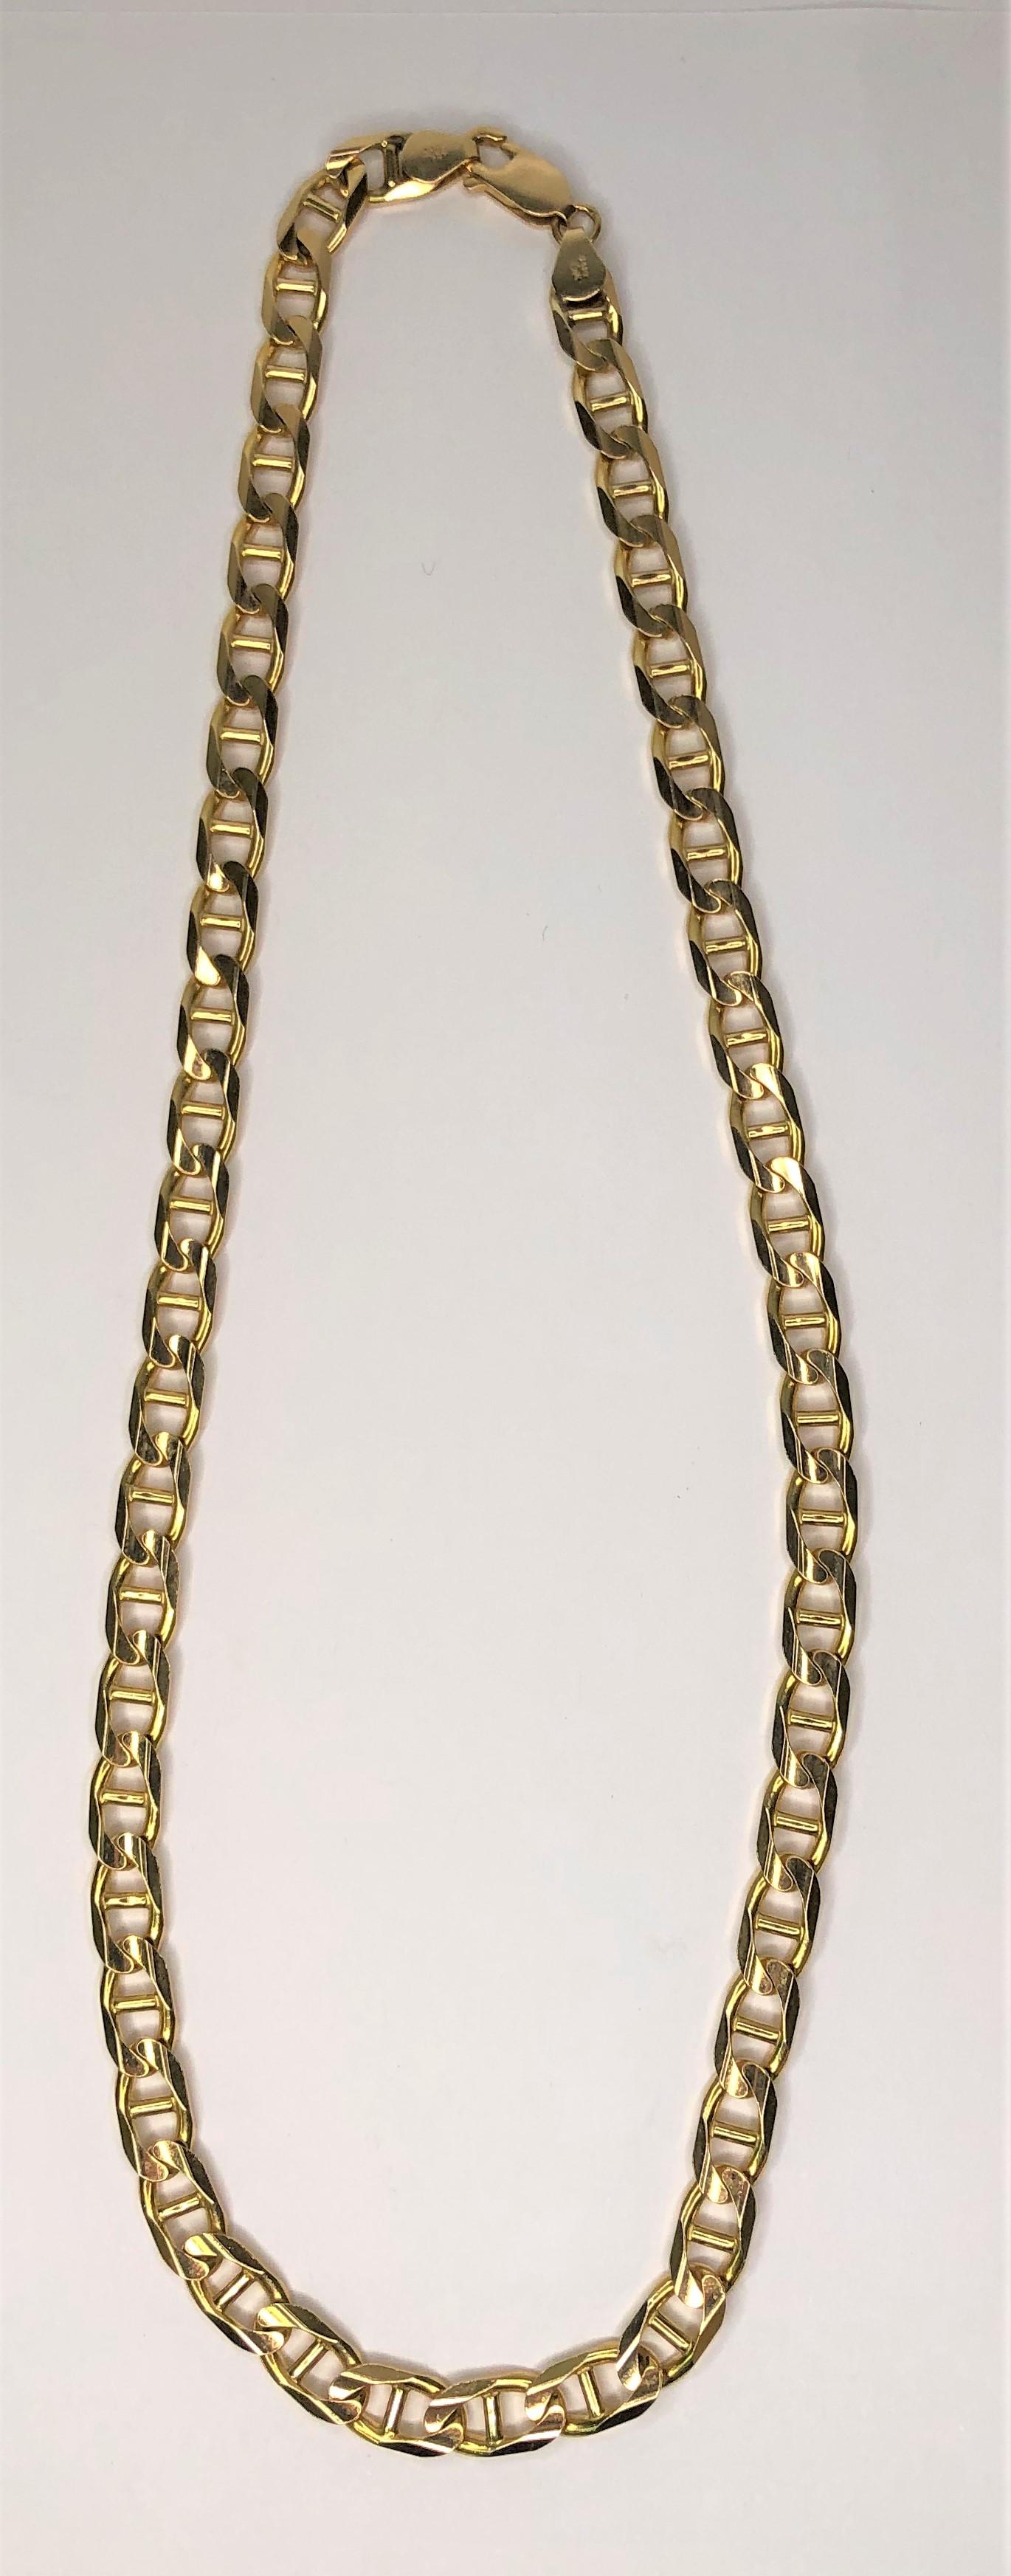 This classic anchor chain is beautiful, a good weight and shiny.  It's a great piece!
14 karat yellow gold anchor style
18 inches long
Approximately 6.3mm wide
Stamped 